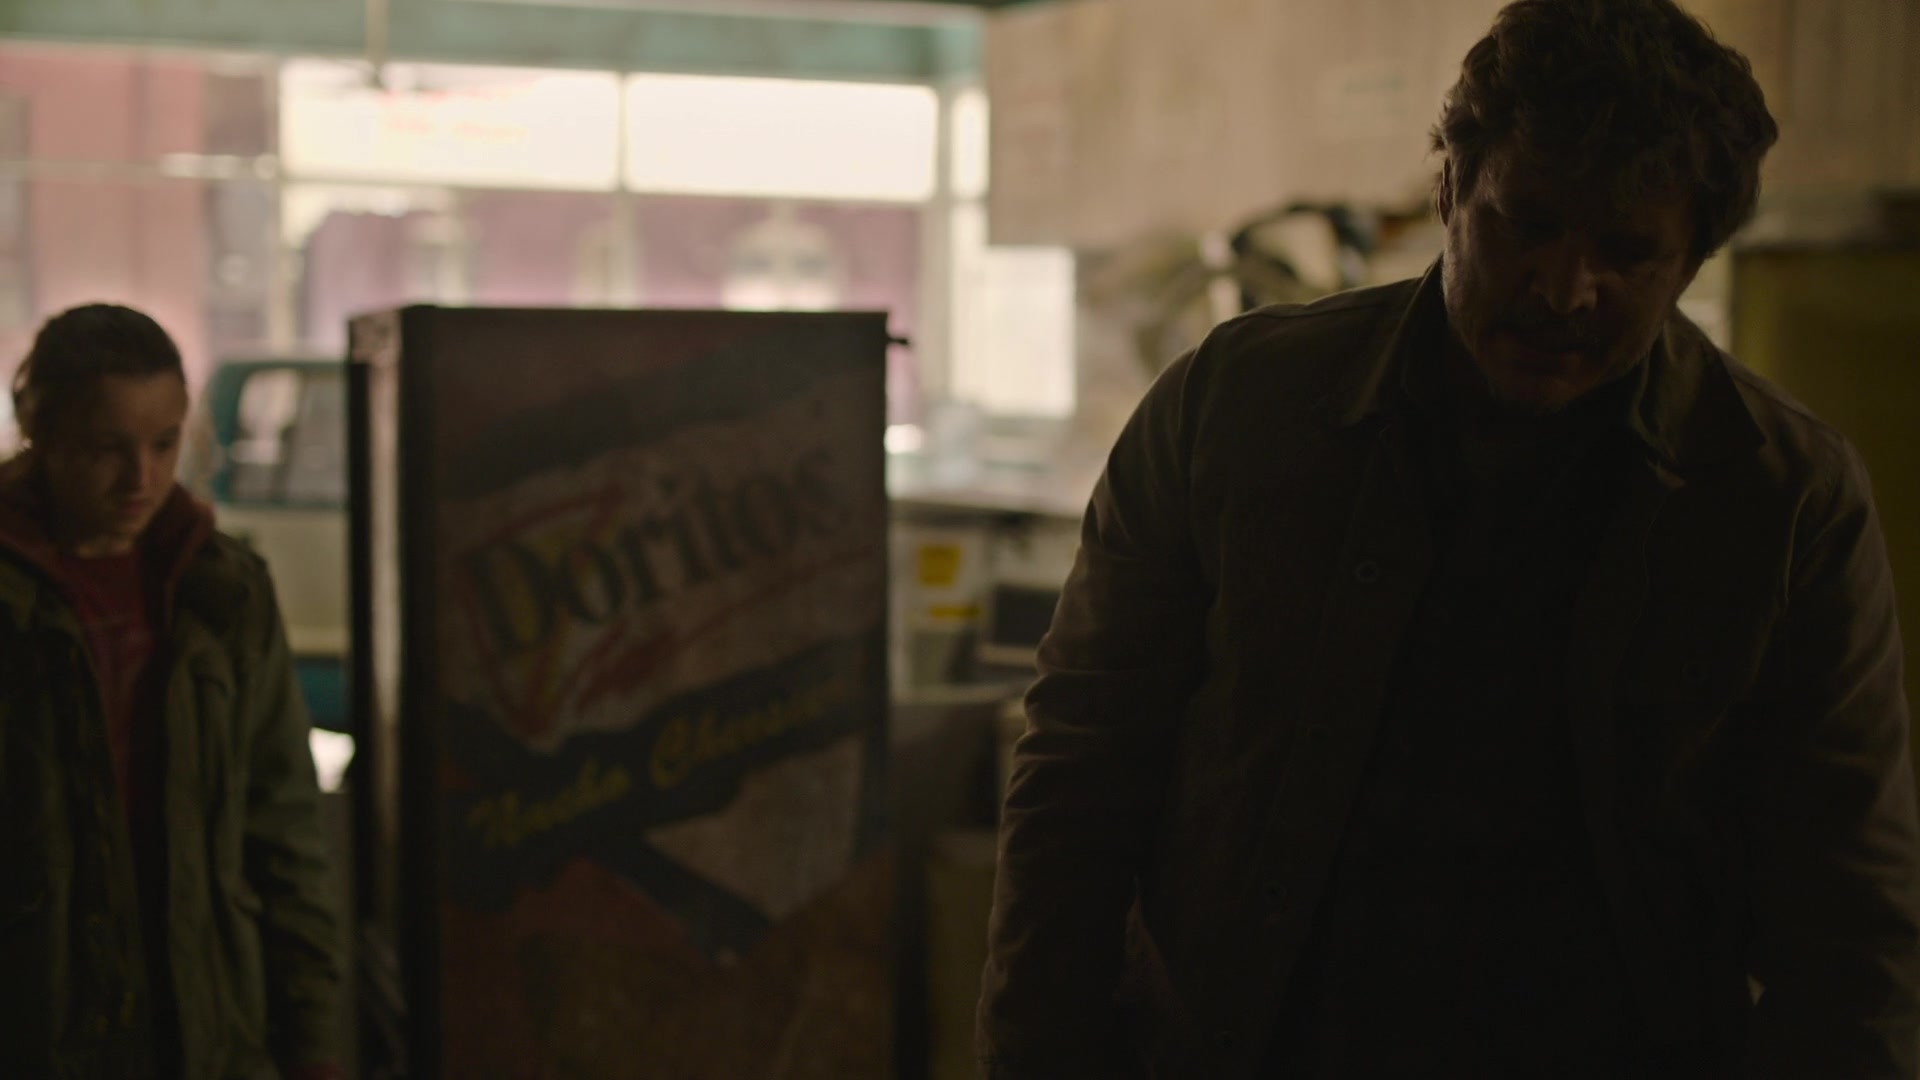 Doritos Chips In The Last Of Us S01E04 